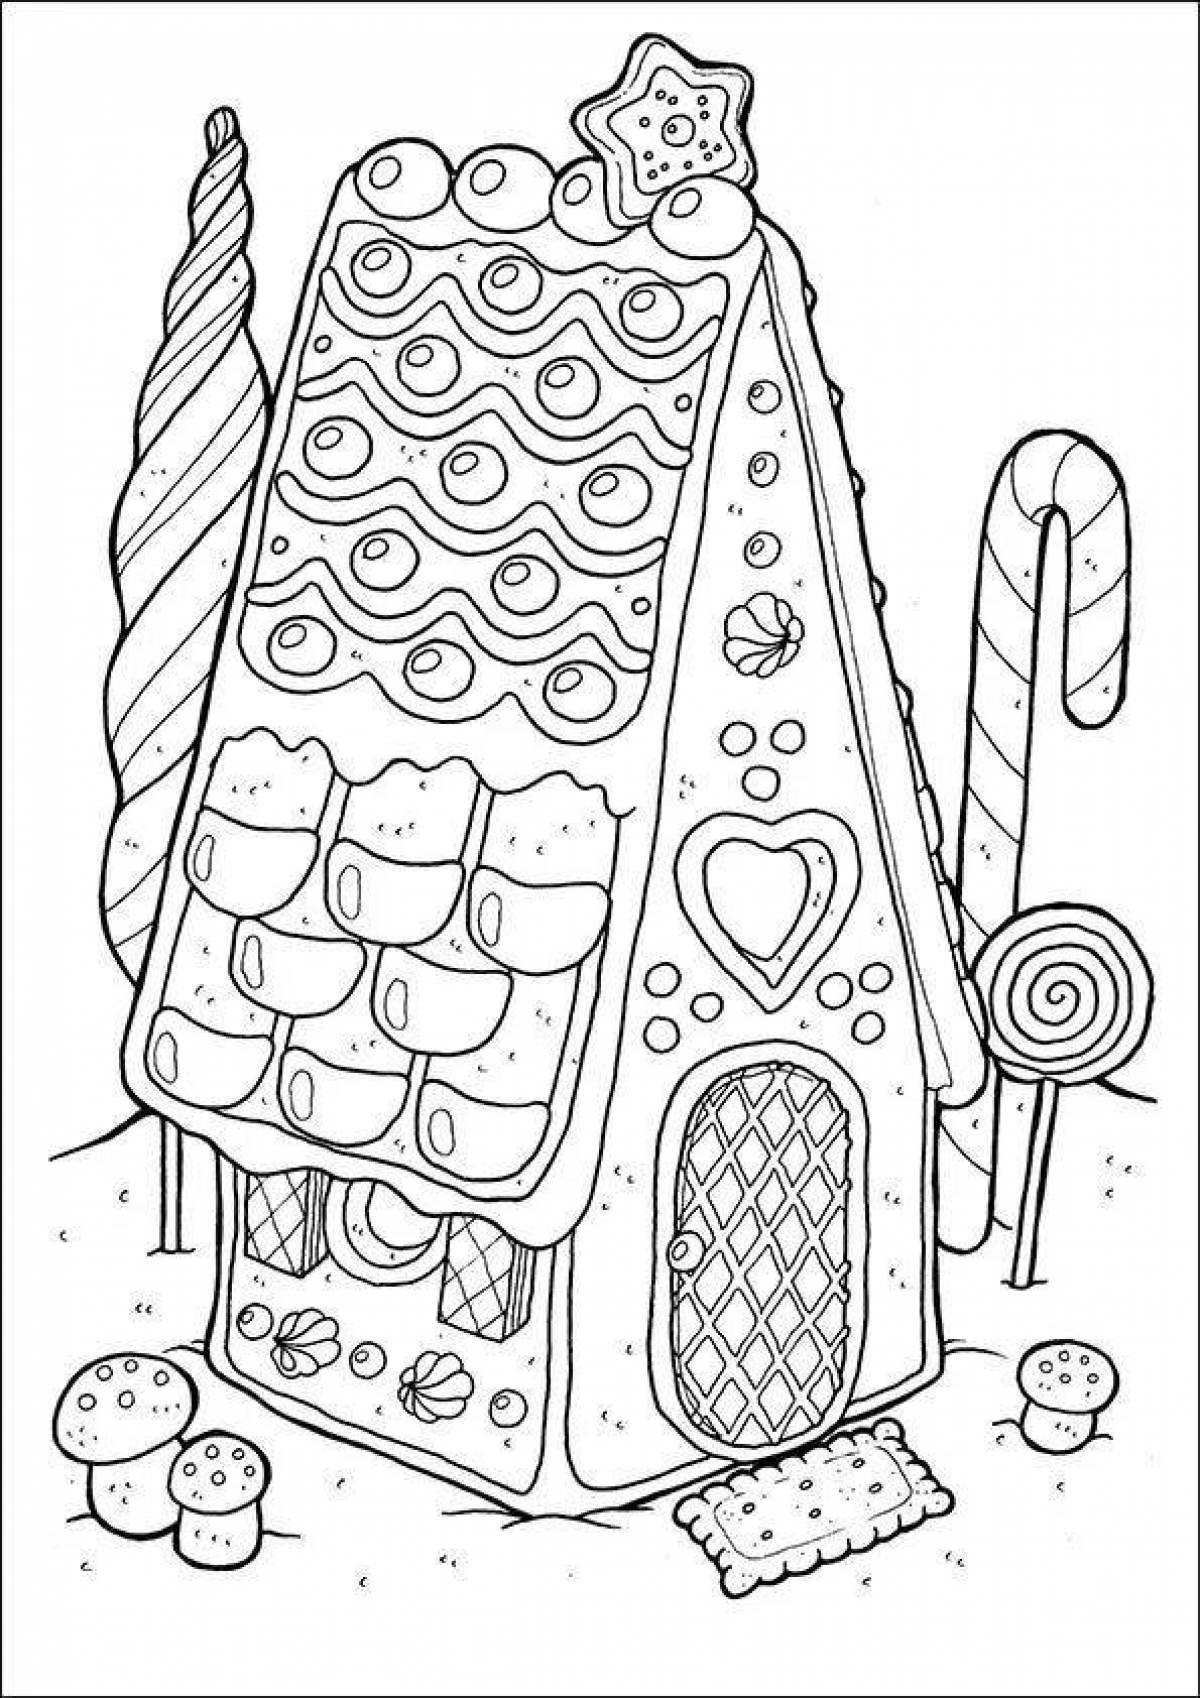 Gorgeous gingerbread house coloring book for kids